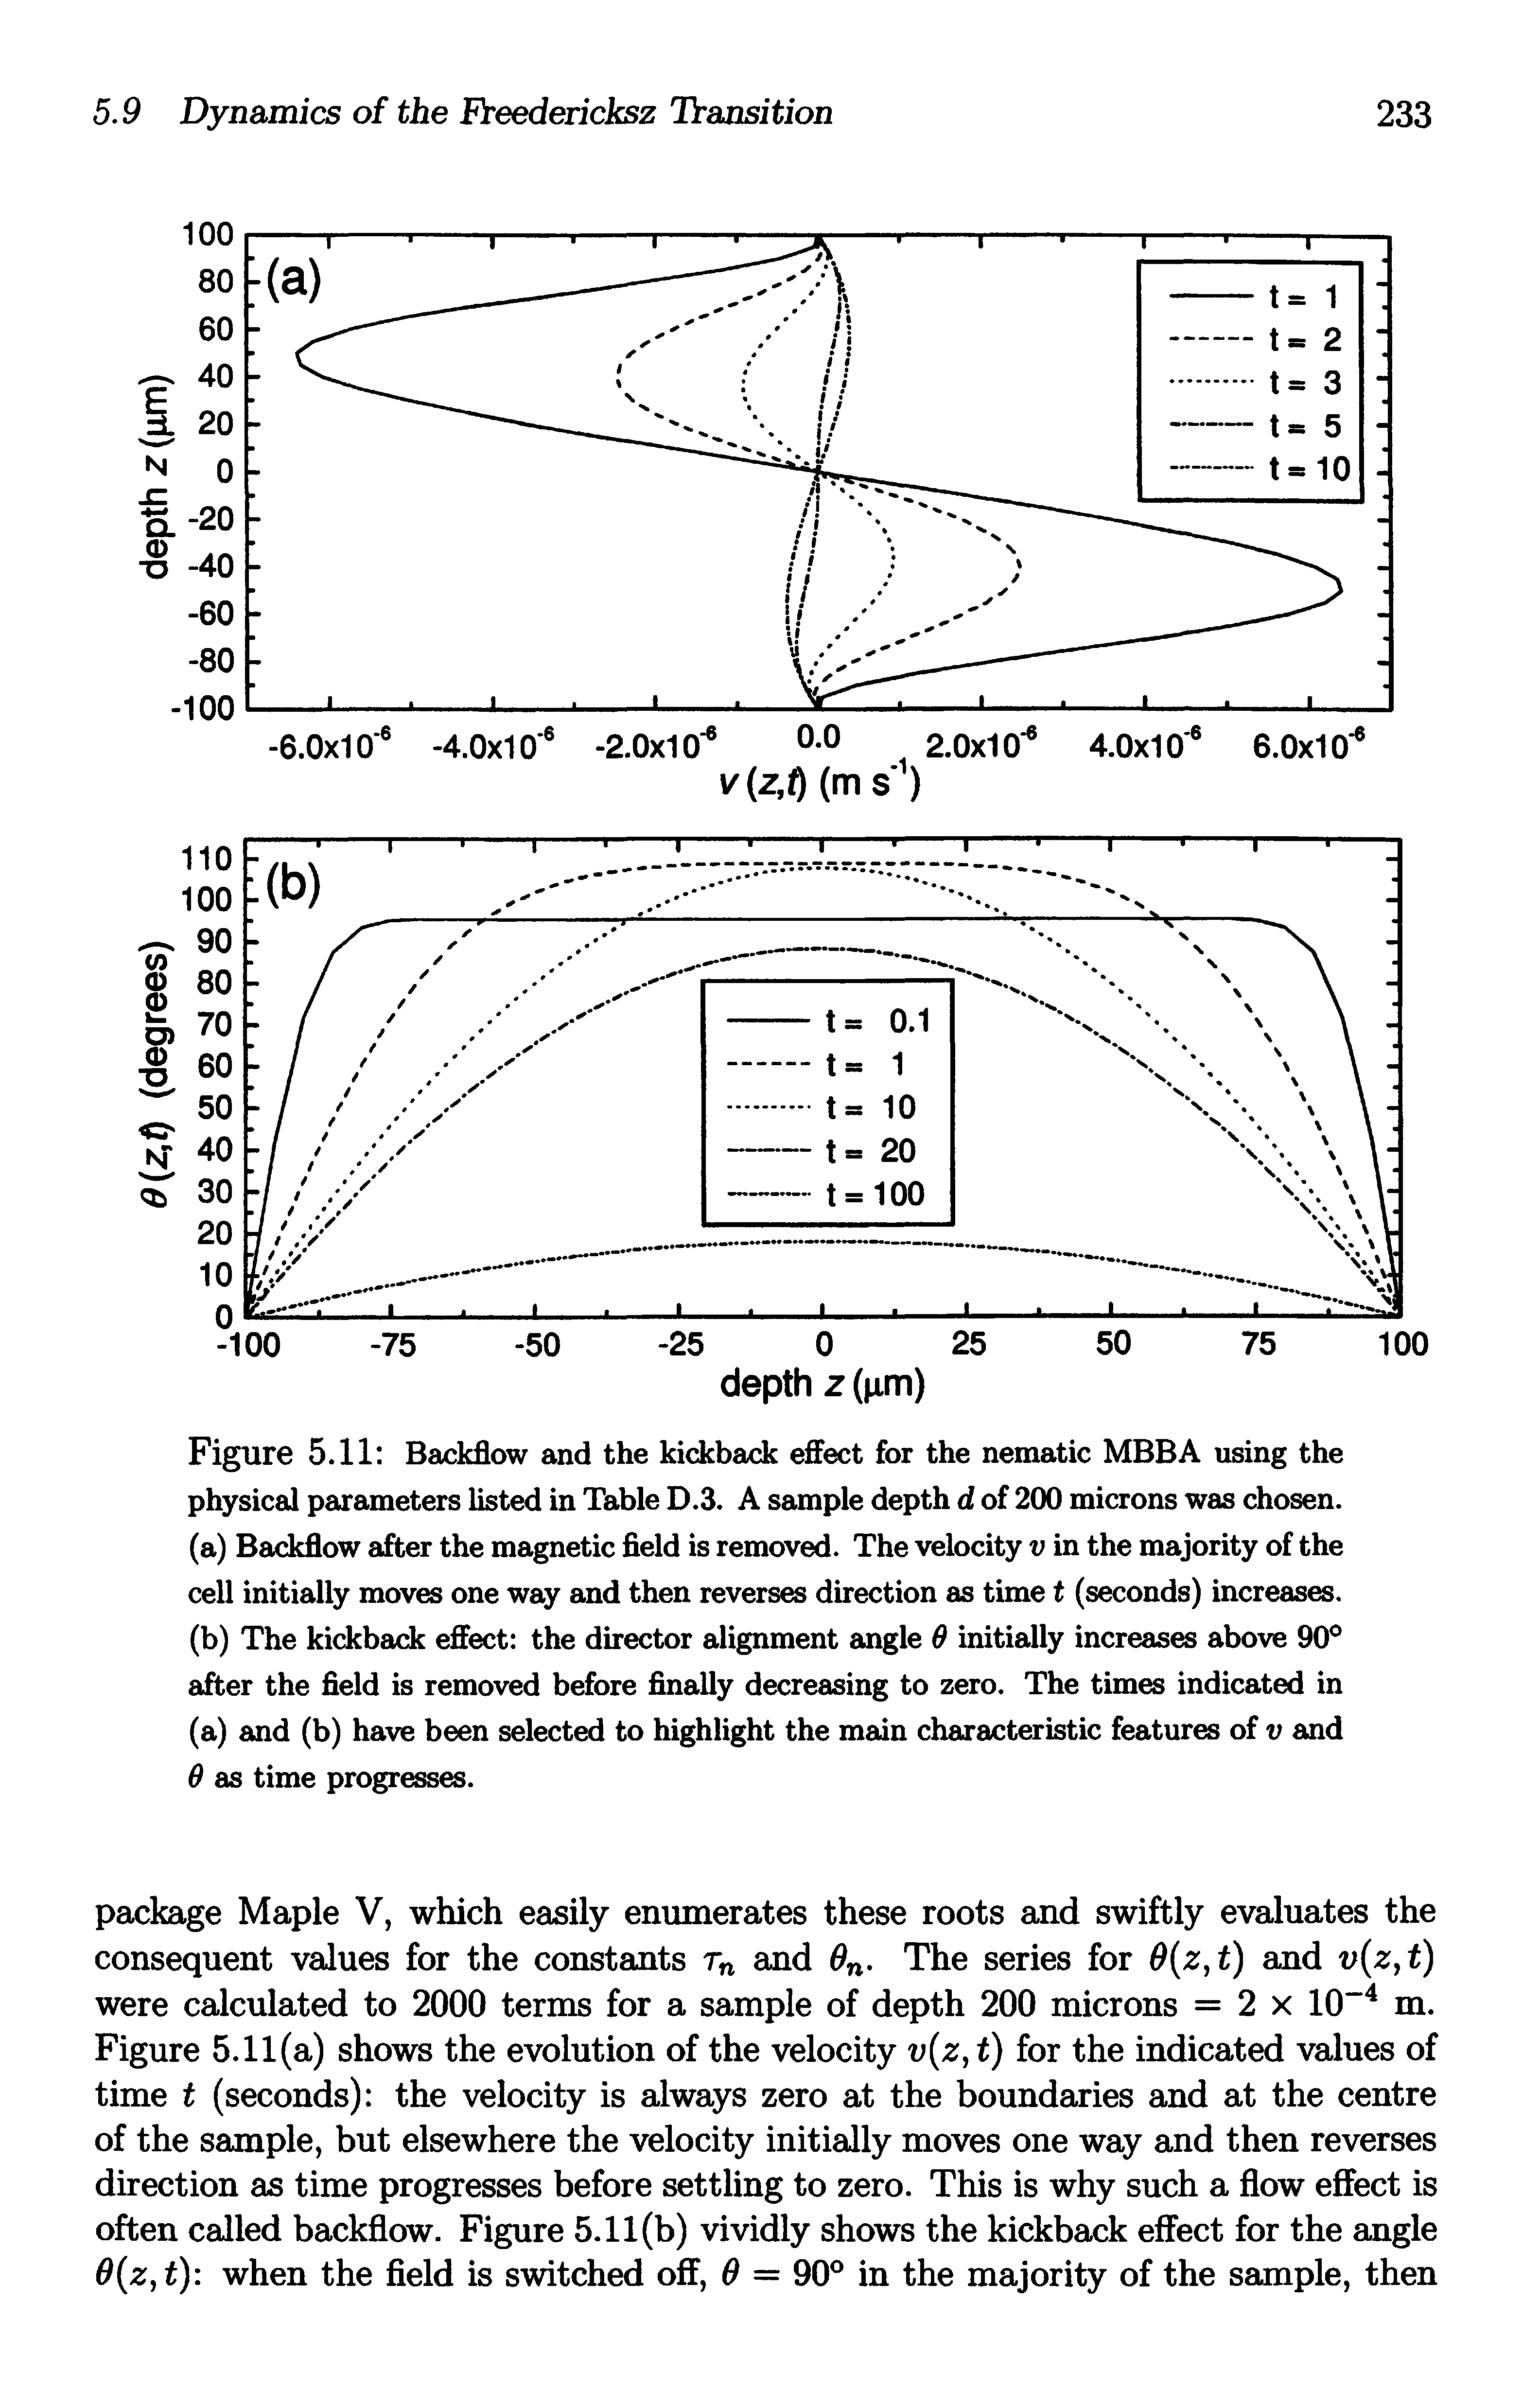 Figure 5.11 Backflow and the kickback effect for the nematic MBBA using the physical parameters listed in Table D.3. A sample depth d of 200 microns was chosen.